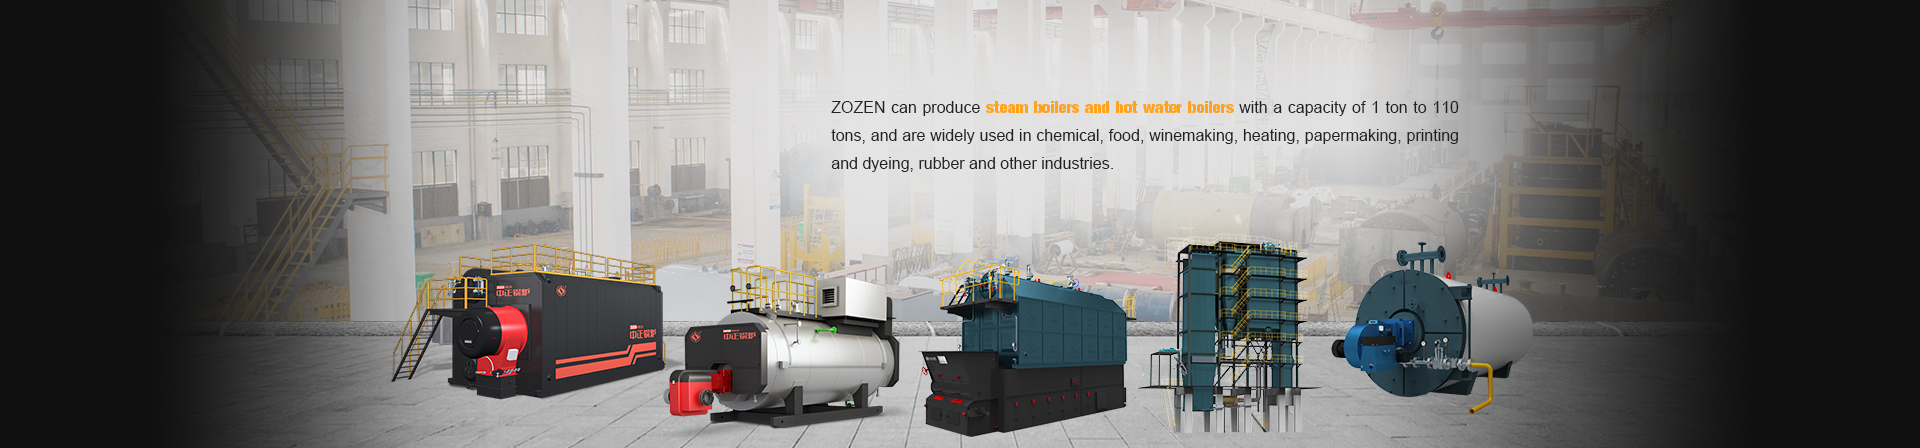 1 tons - 110 tons boilers produced by ZOZEN